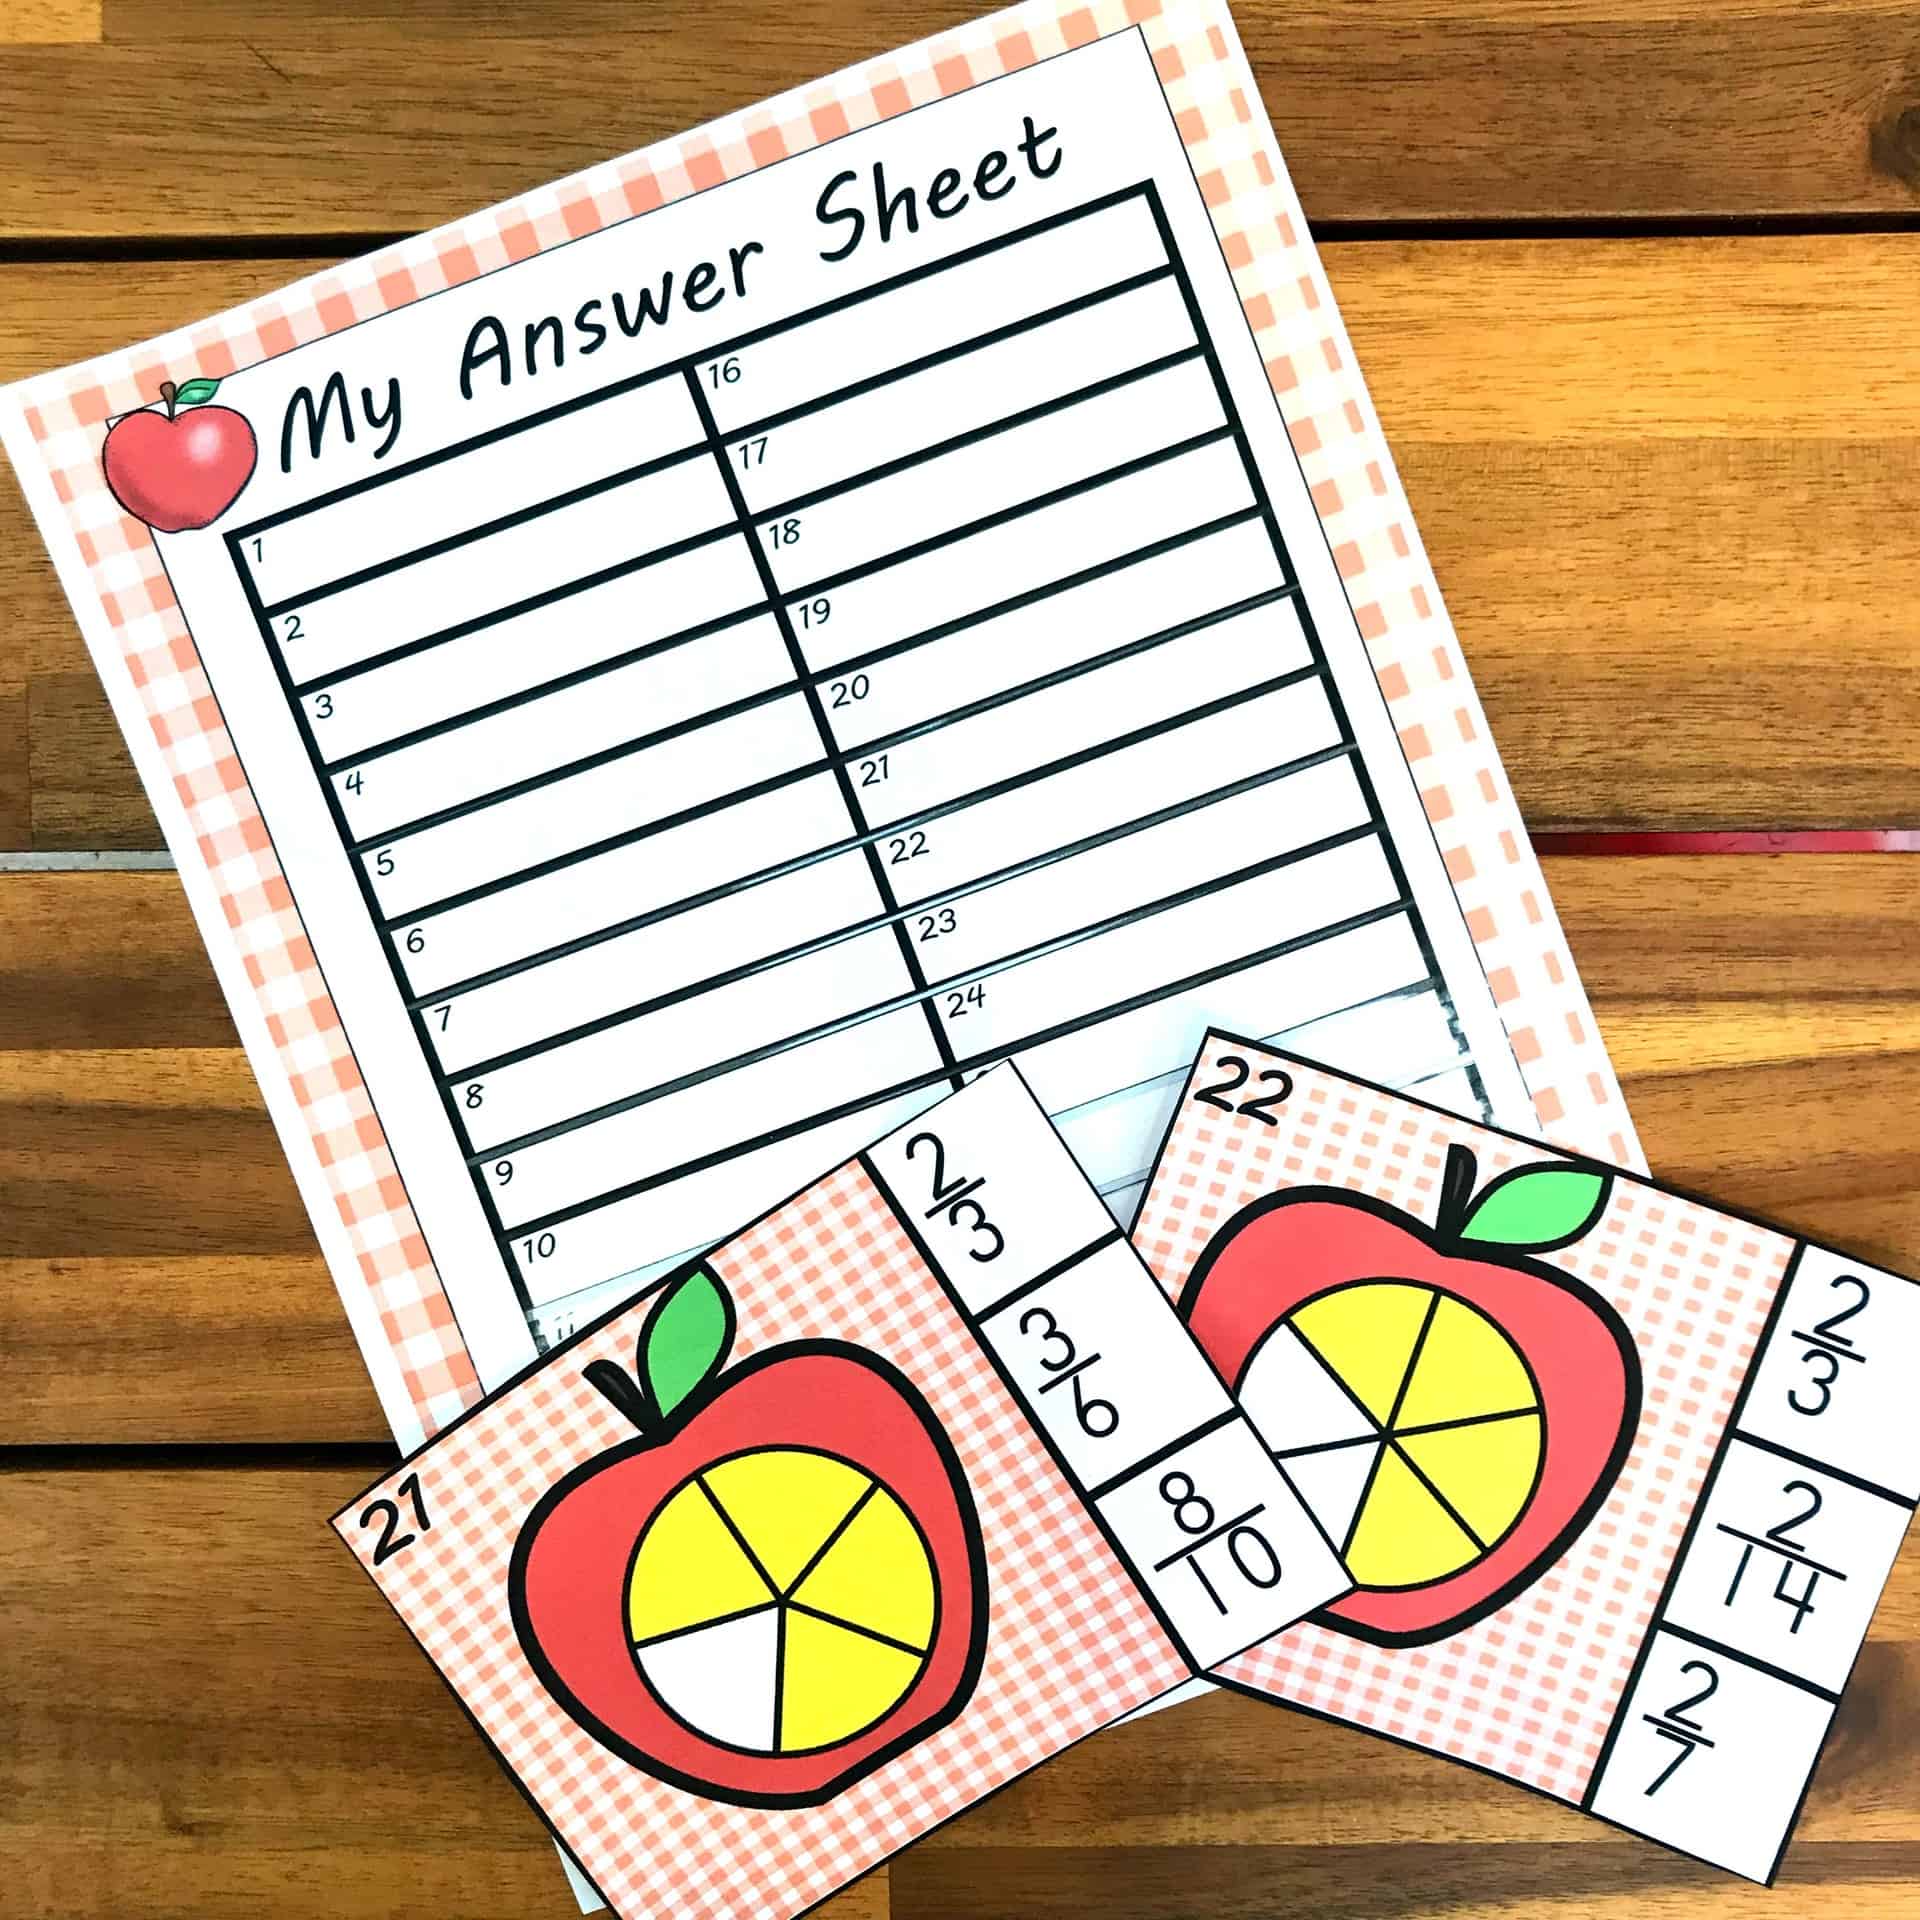 Grab these FREE Apple Clip Cards for an Equivalent Fraction Activity